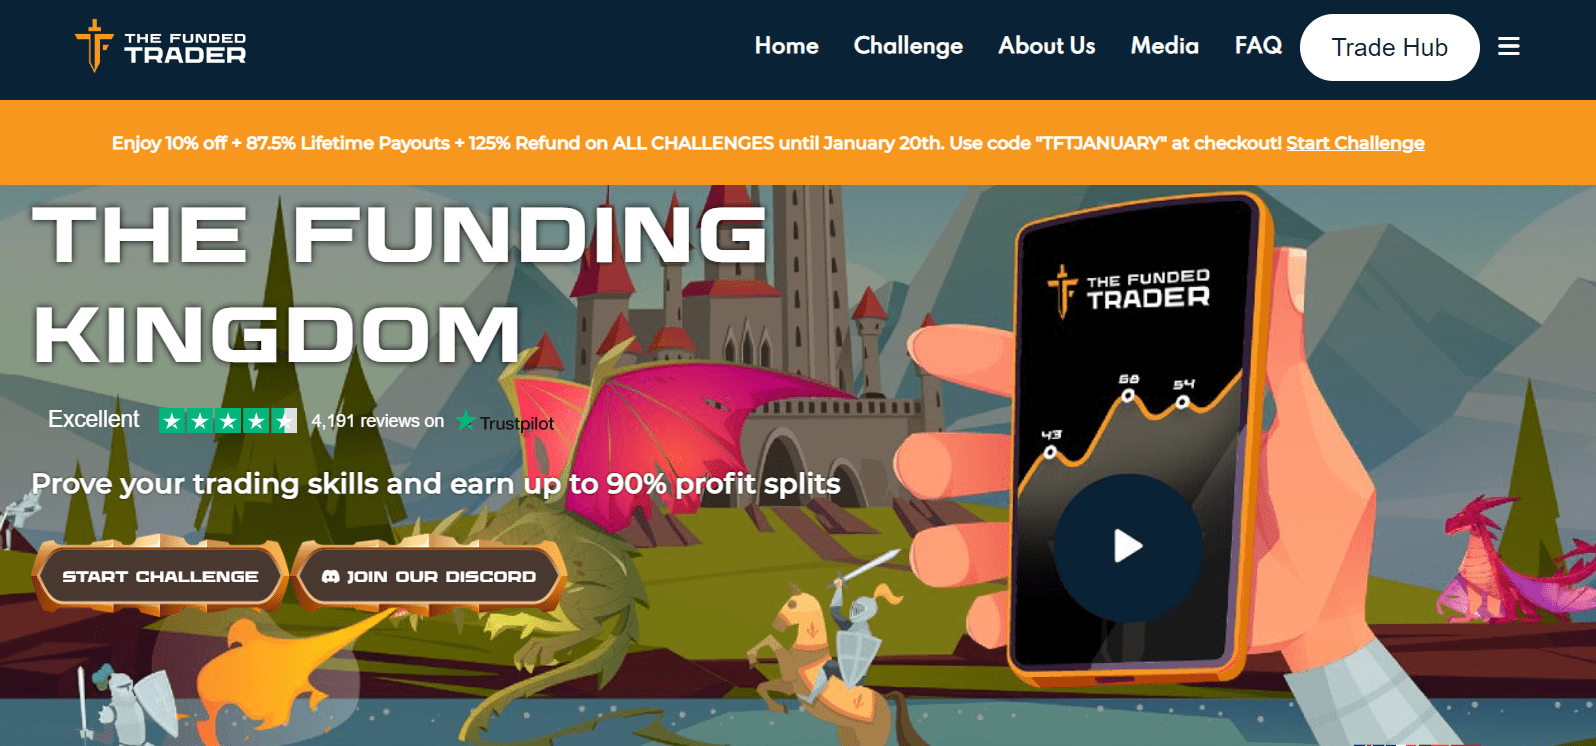 Review The Funded Trader - Start Challenge